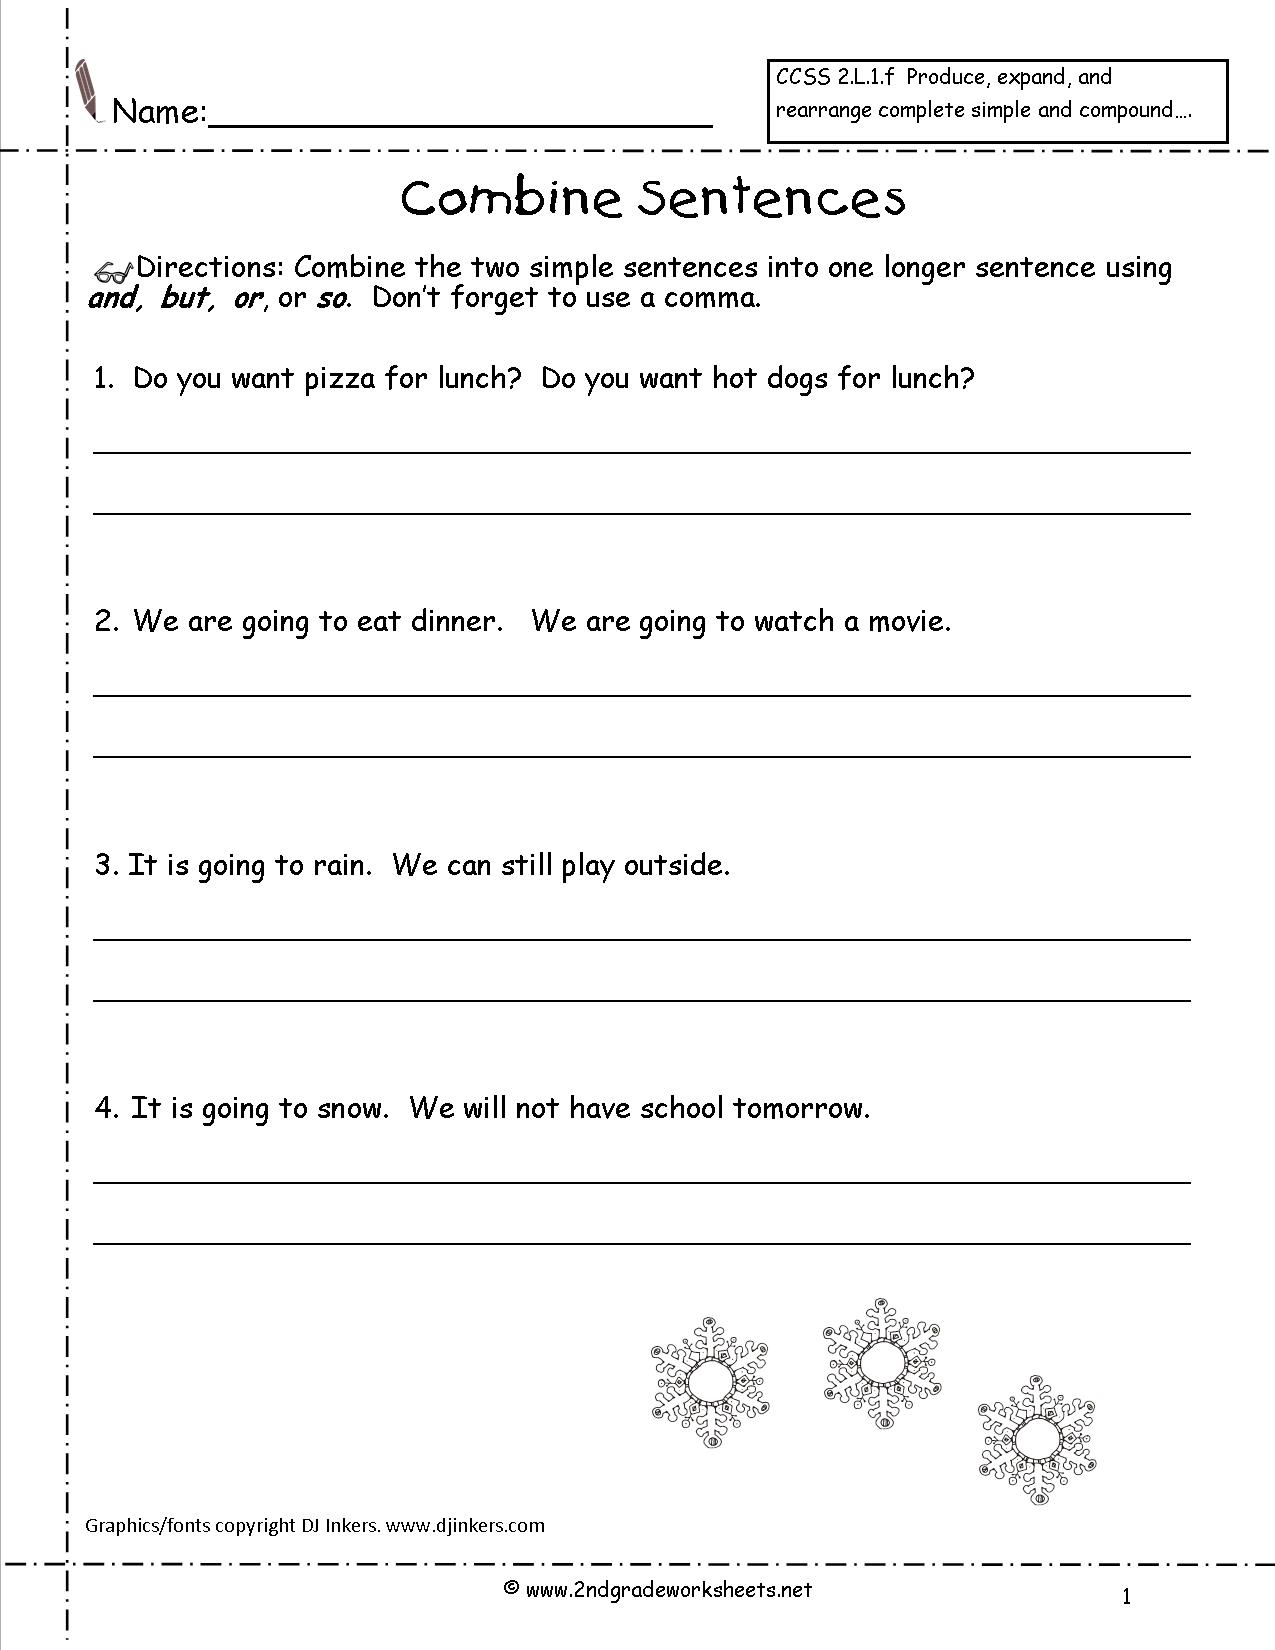 15-best-images-of-first-grade-compound-worksheets-combining-sentences